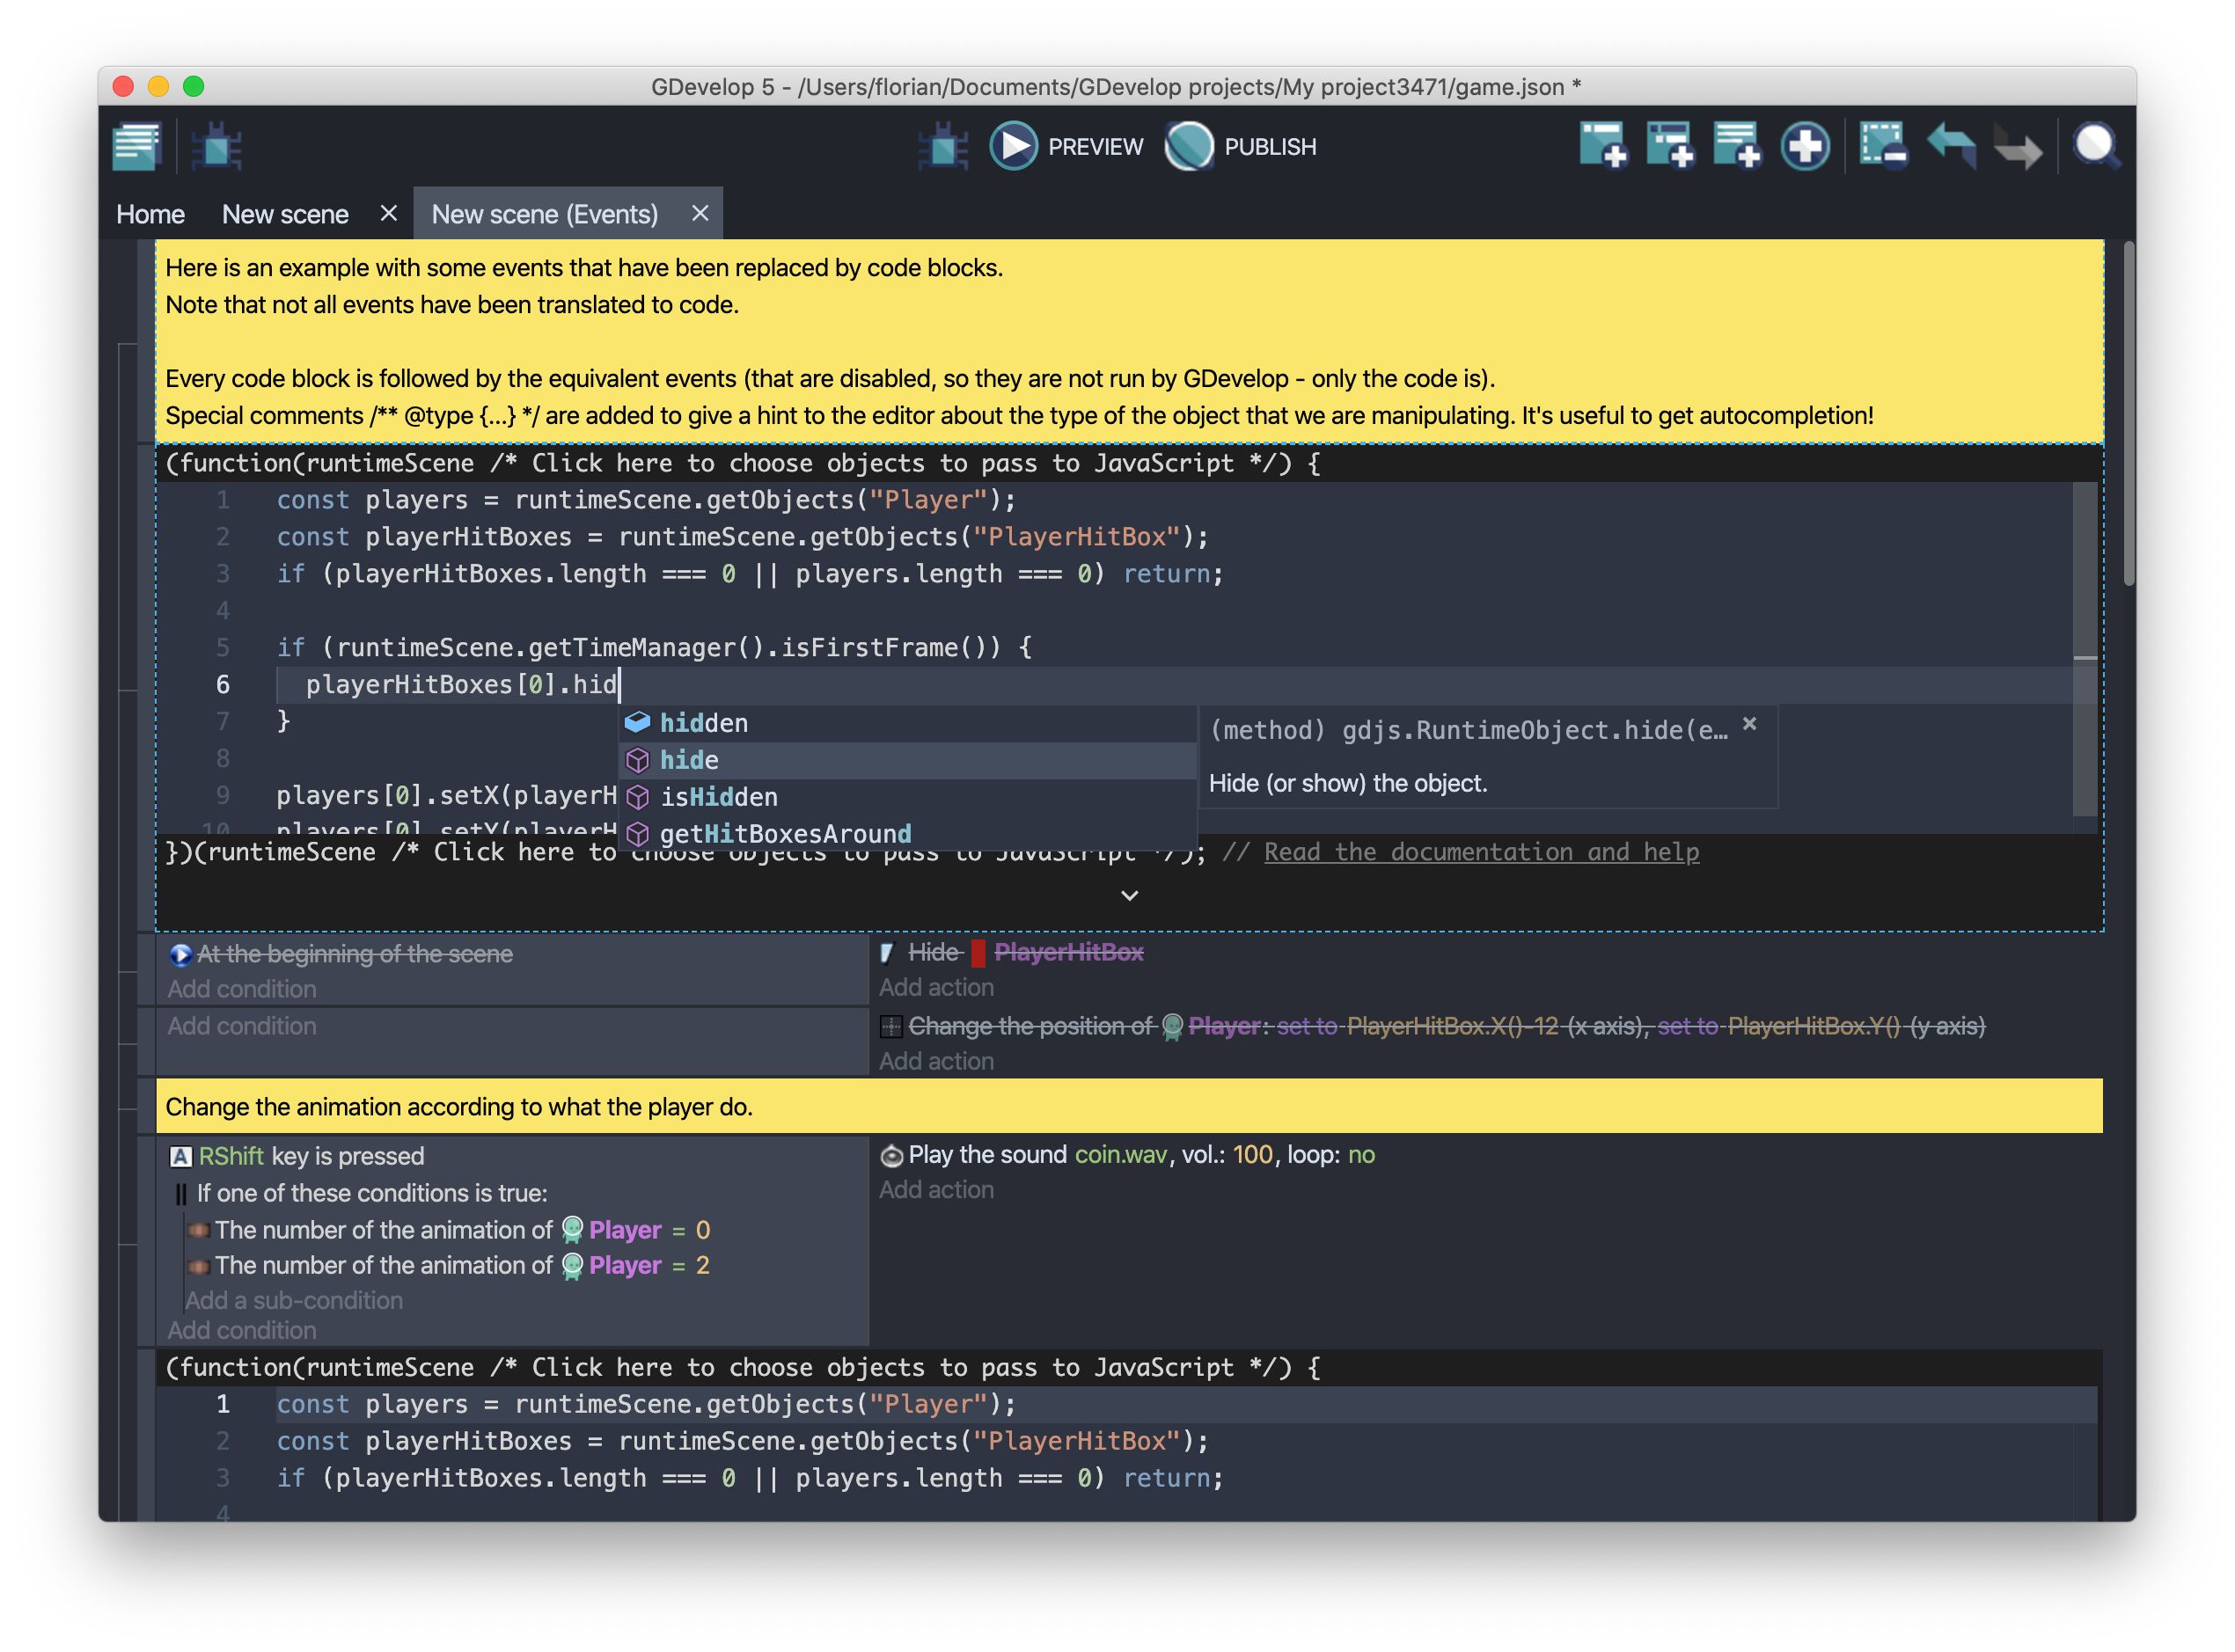 The Dark theme being used in GDevelop. The code editor also comes bundled with several beautiful themes!